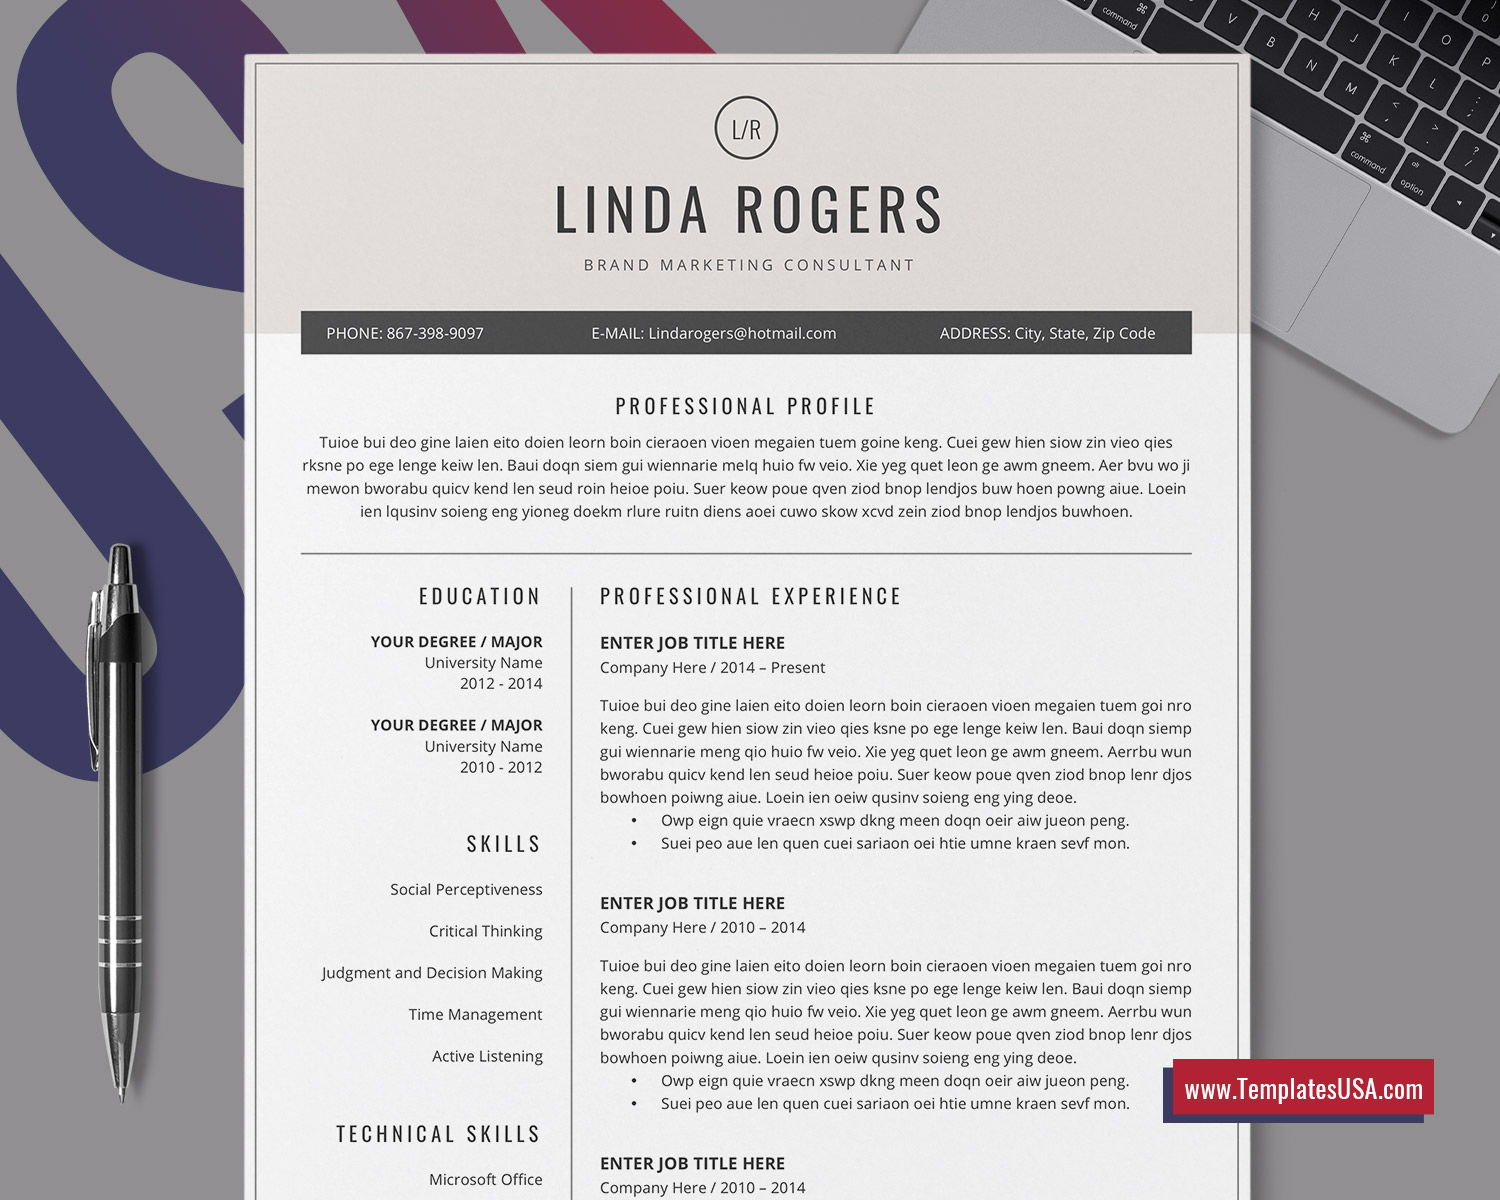 Professional Resume Template Ms Word Resume Format Curriculum Vitae Simple And Clean Cv Template Design 1 3 Page Editable Resume Unique Resume Editable Resume Instant Download Templatesusa Com